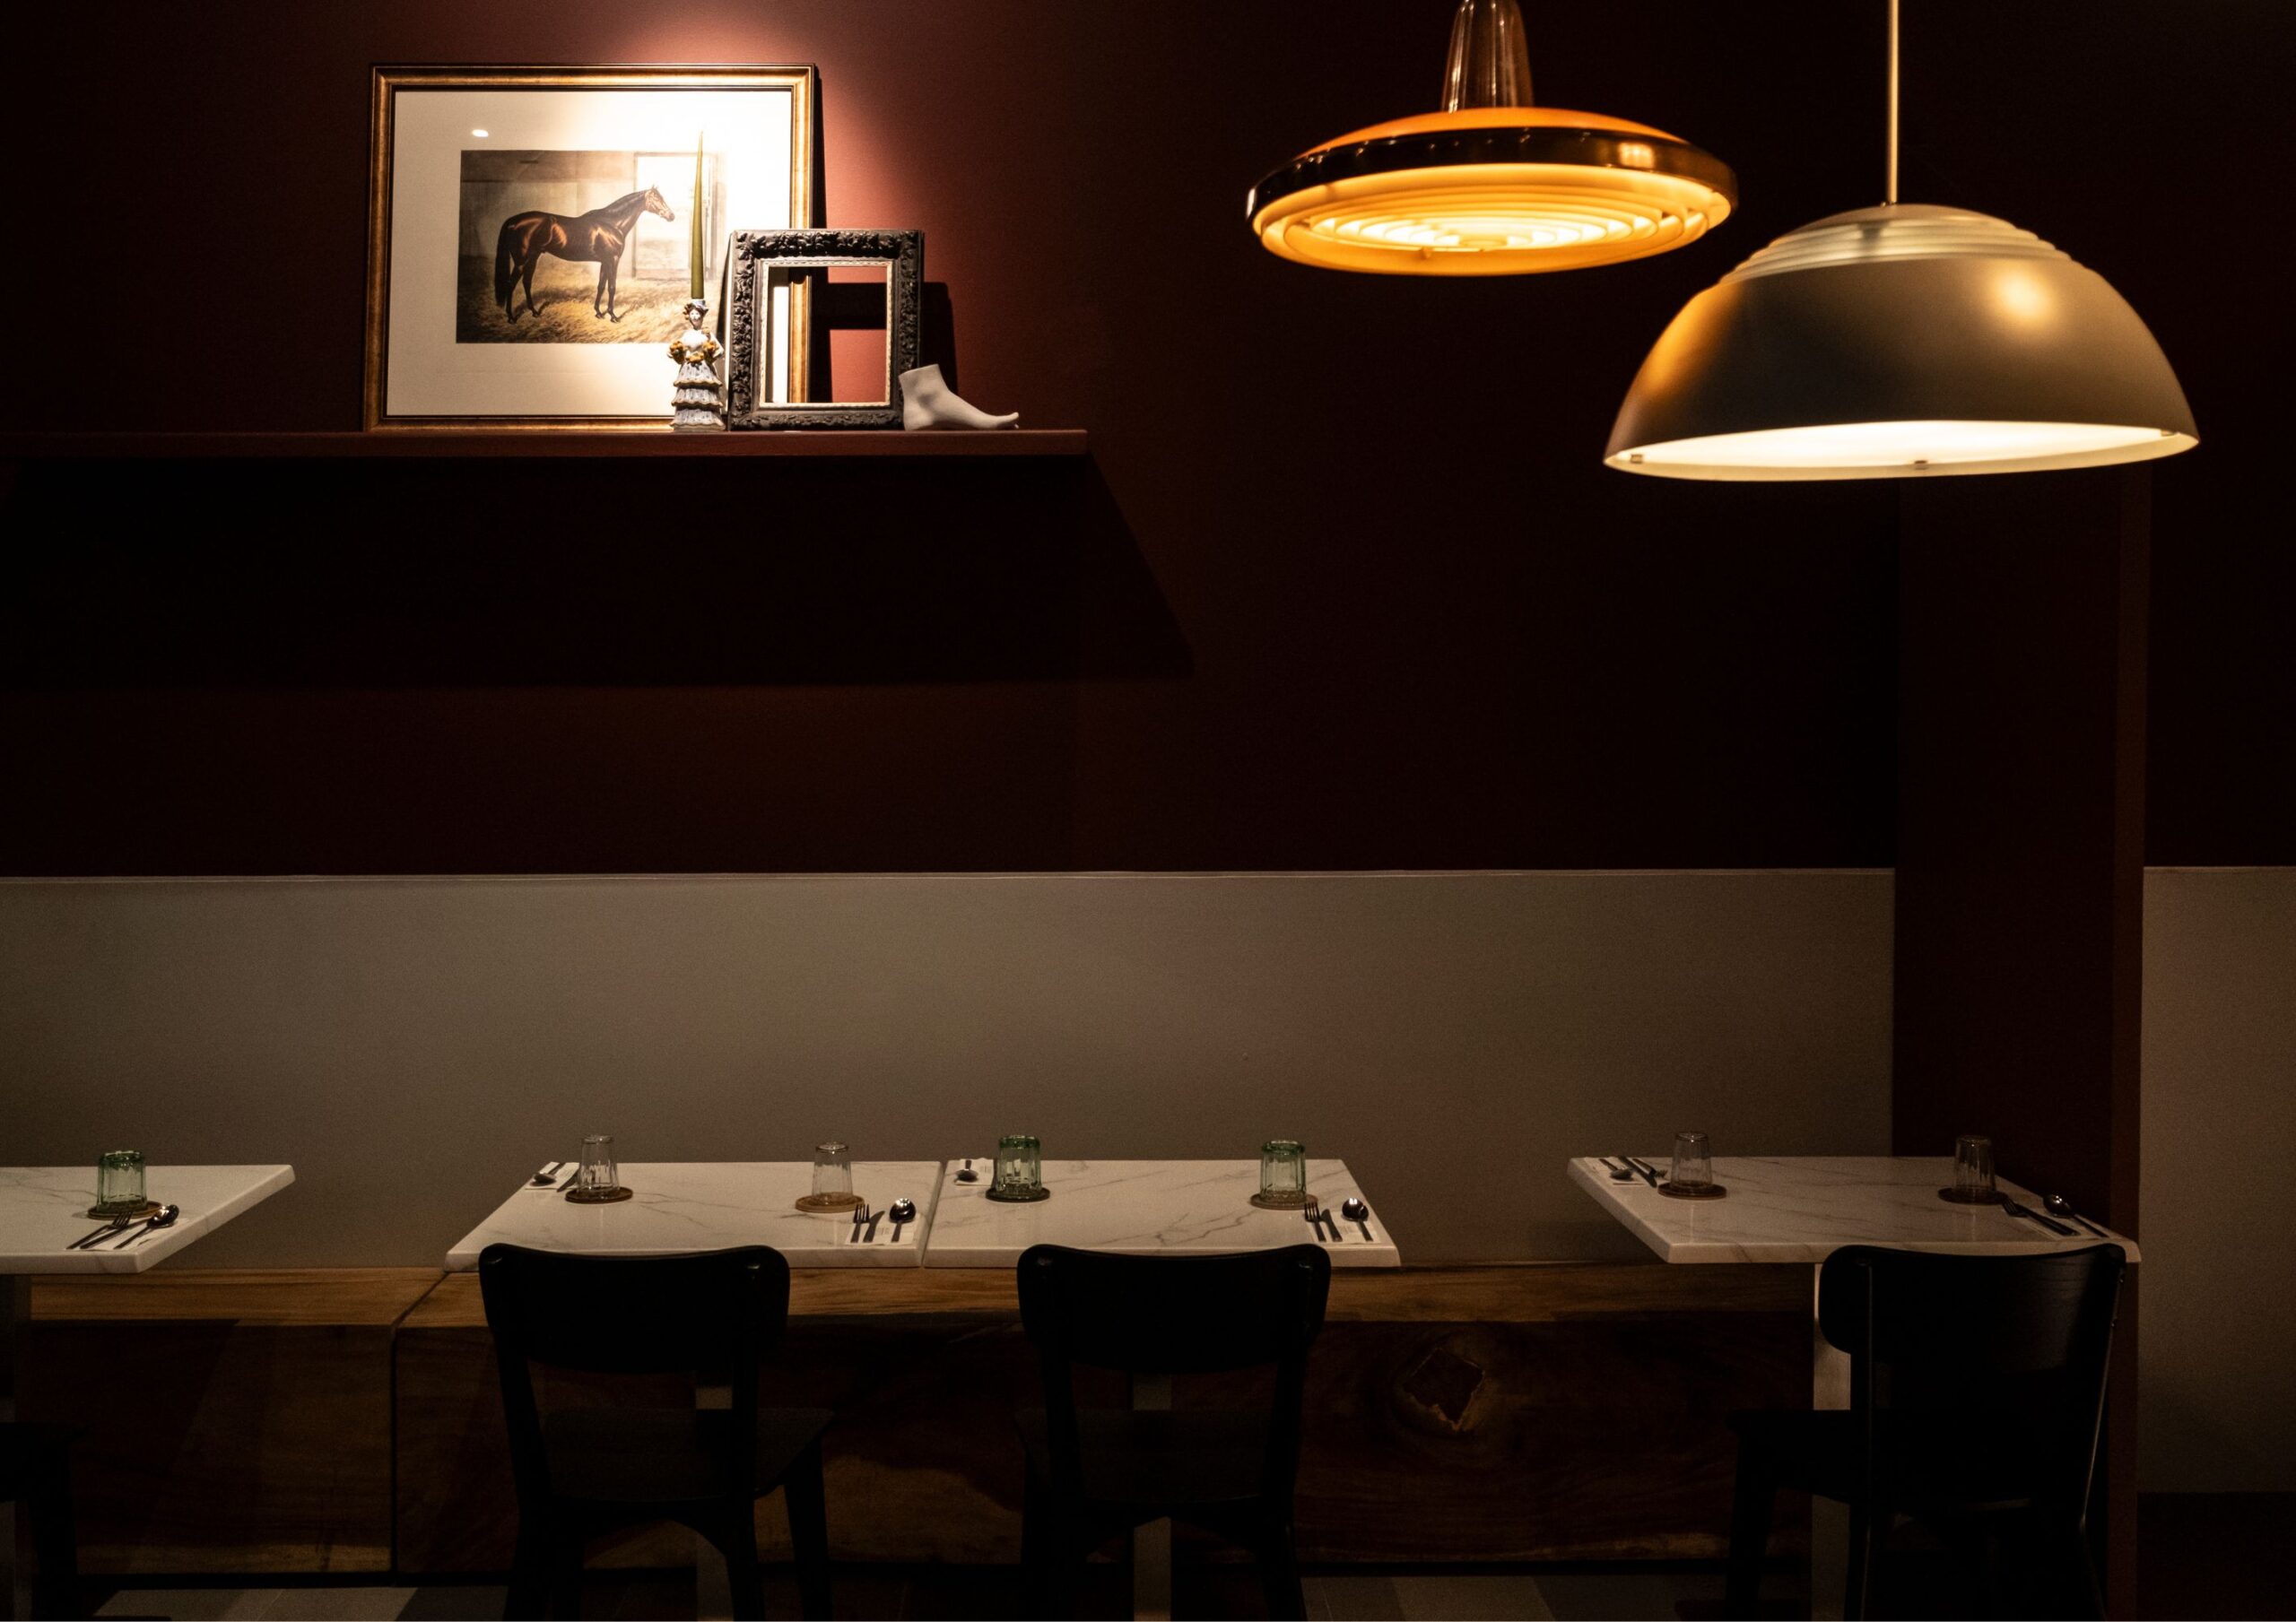 The minimalist dining area of Ito Kish Design Food with burgundy walls and vintage light fixtures.